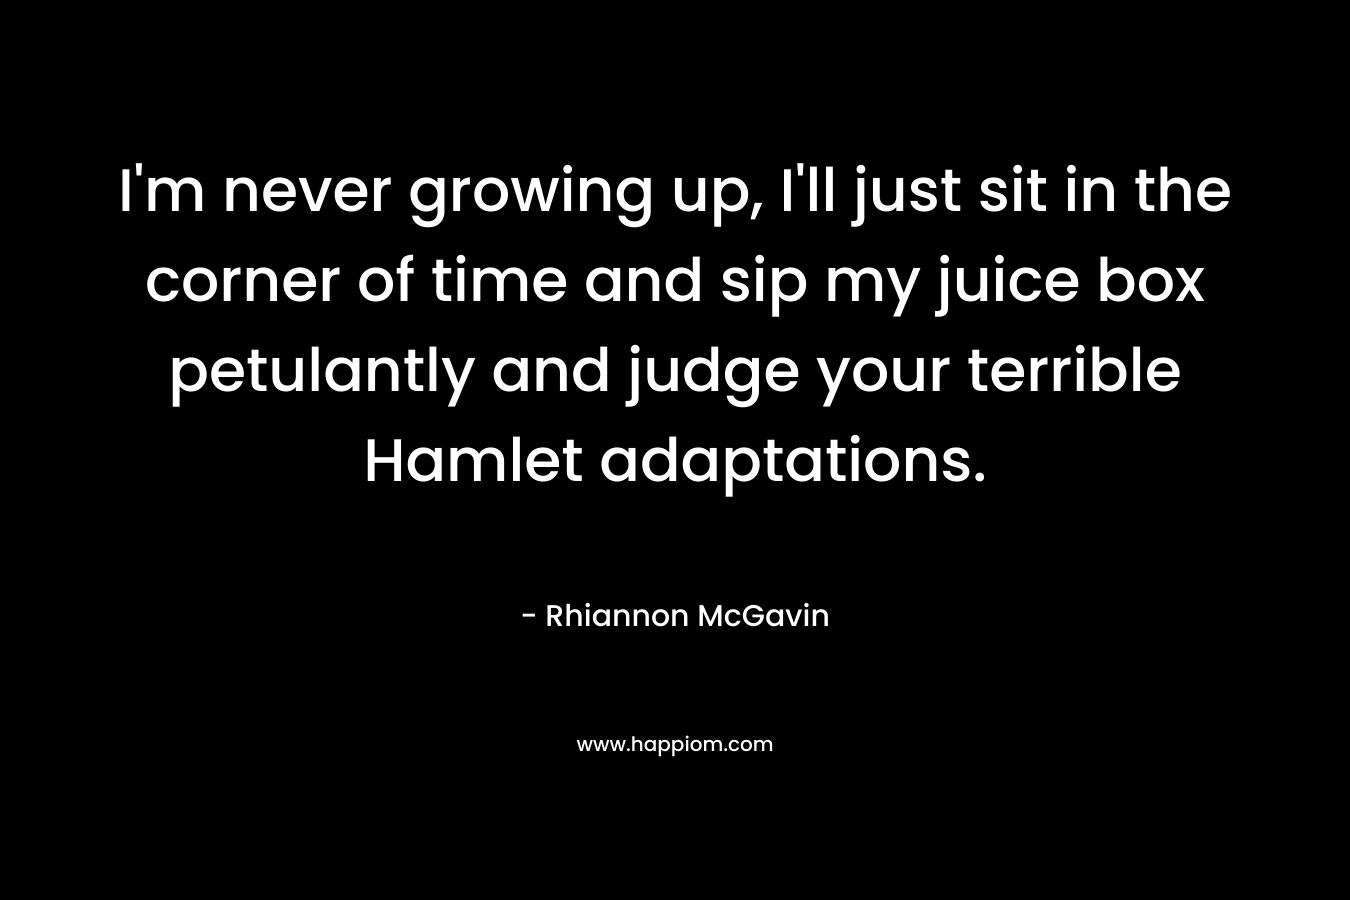 I'm never growing up, I'll just sit in the corner of time and sip my juice box petulantly and judge your terrible Hamlet adaptations.